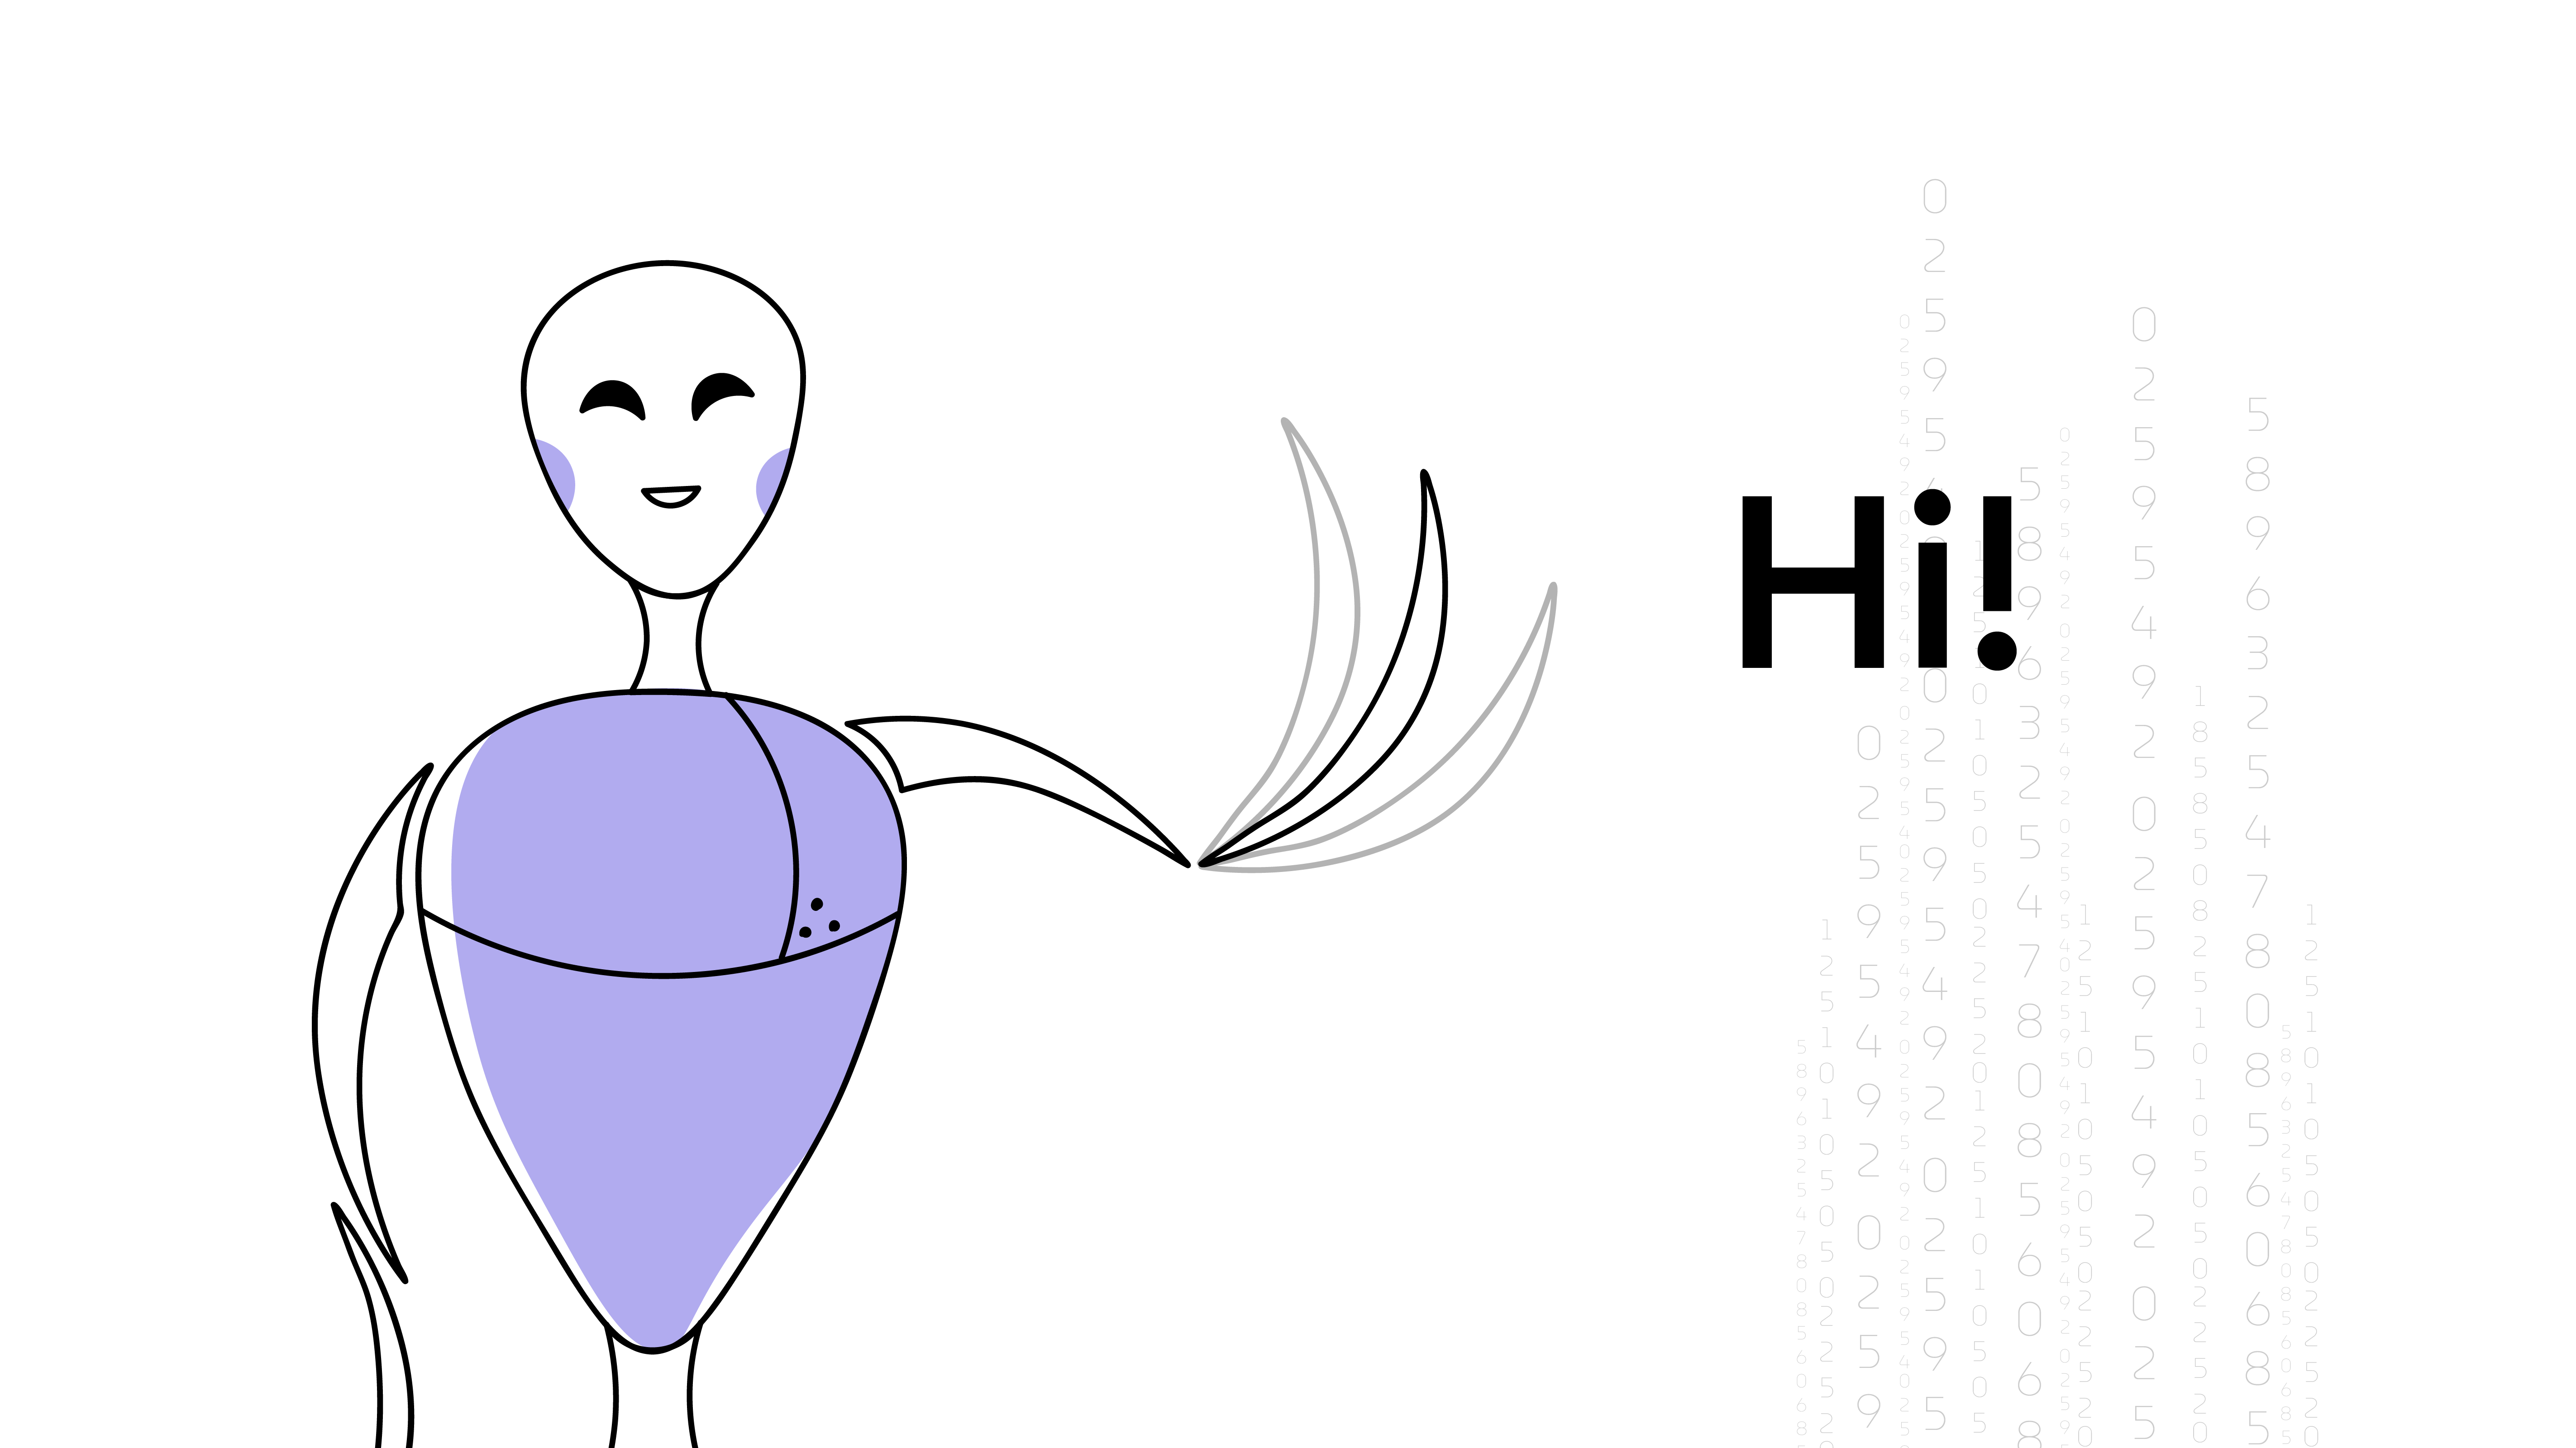 Outline Illustration of an AI robot which is waving and saying "Hi".